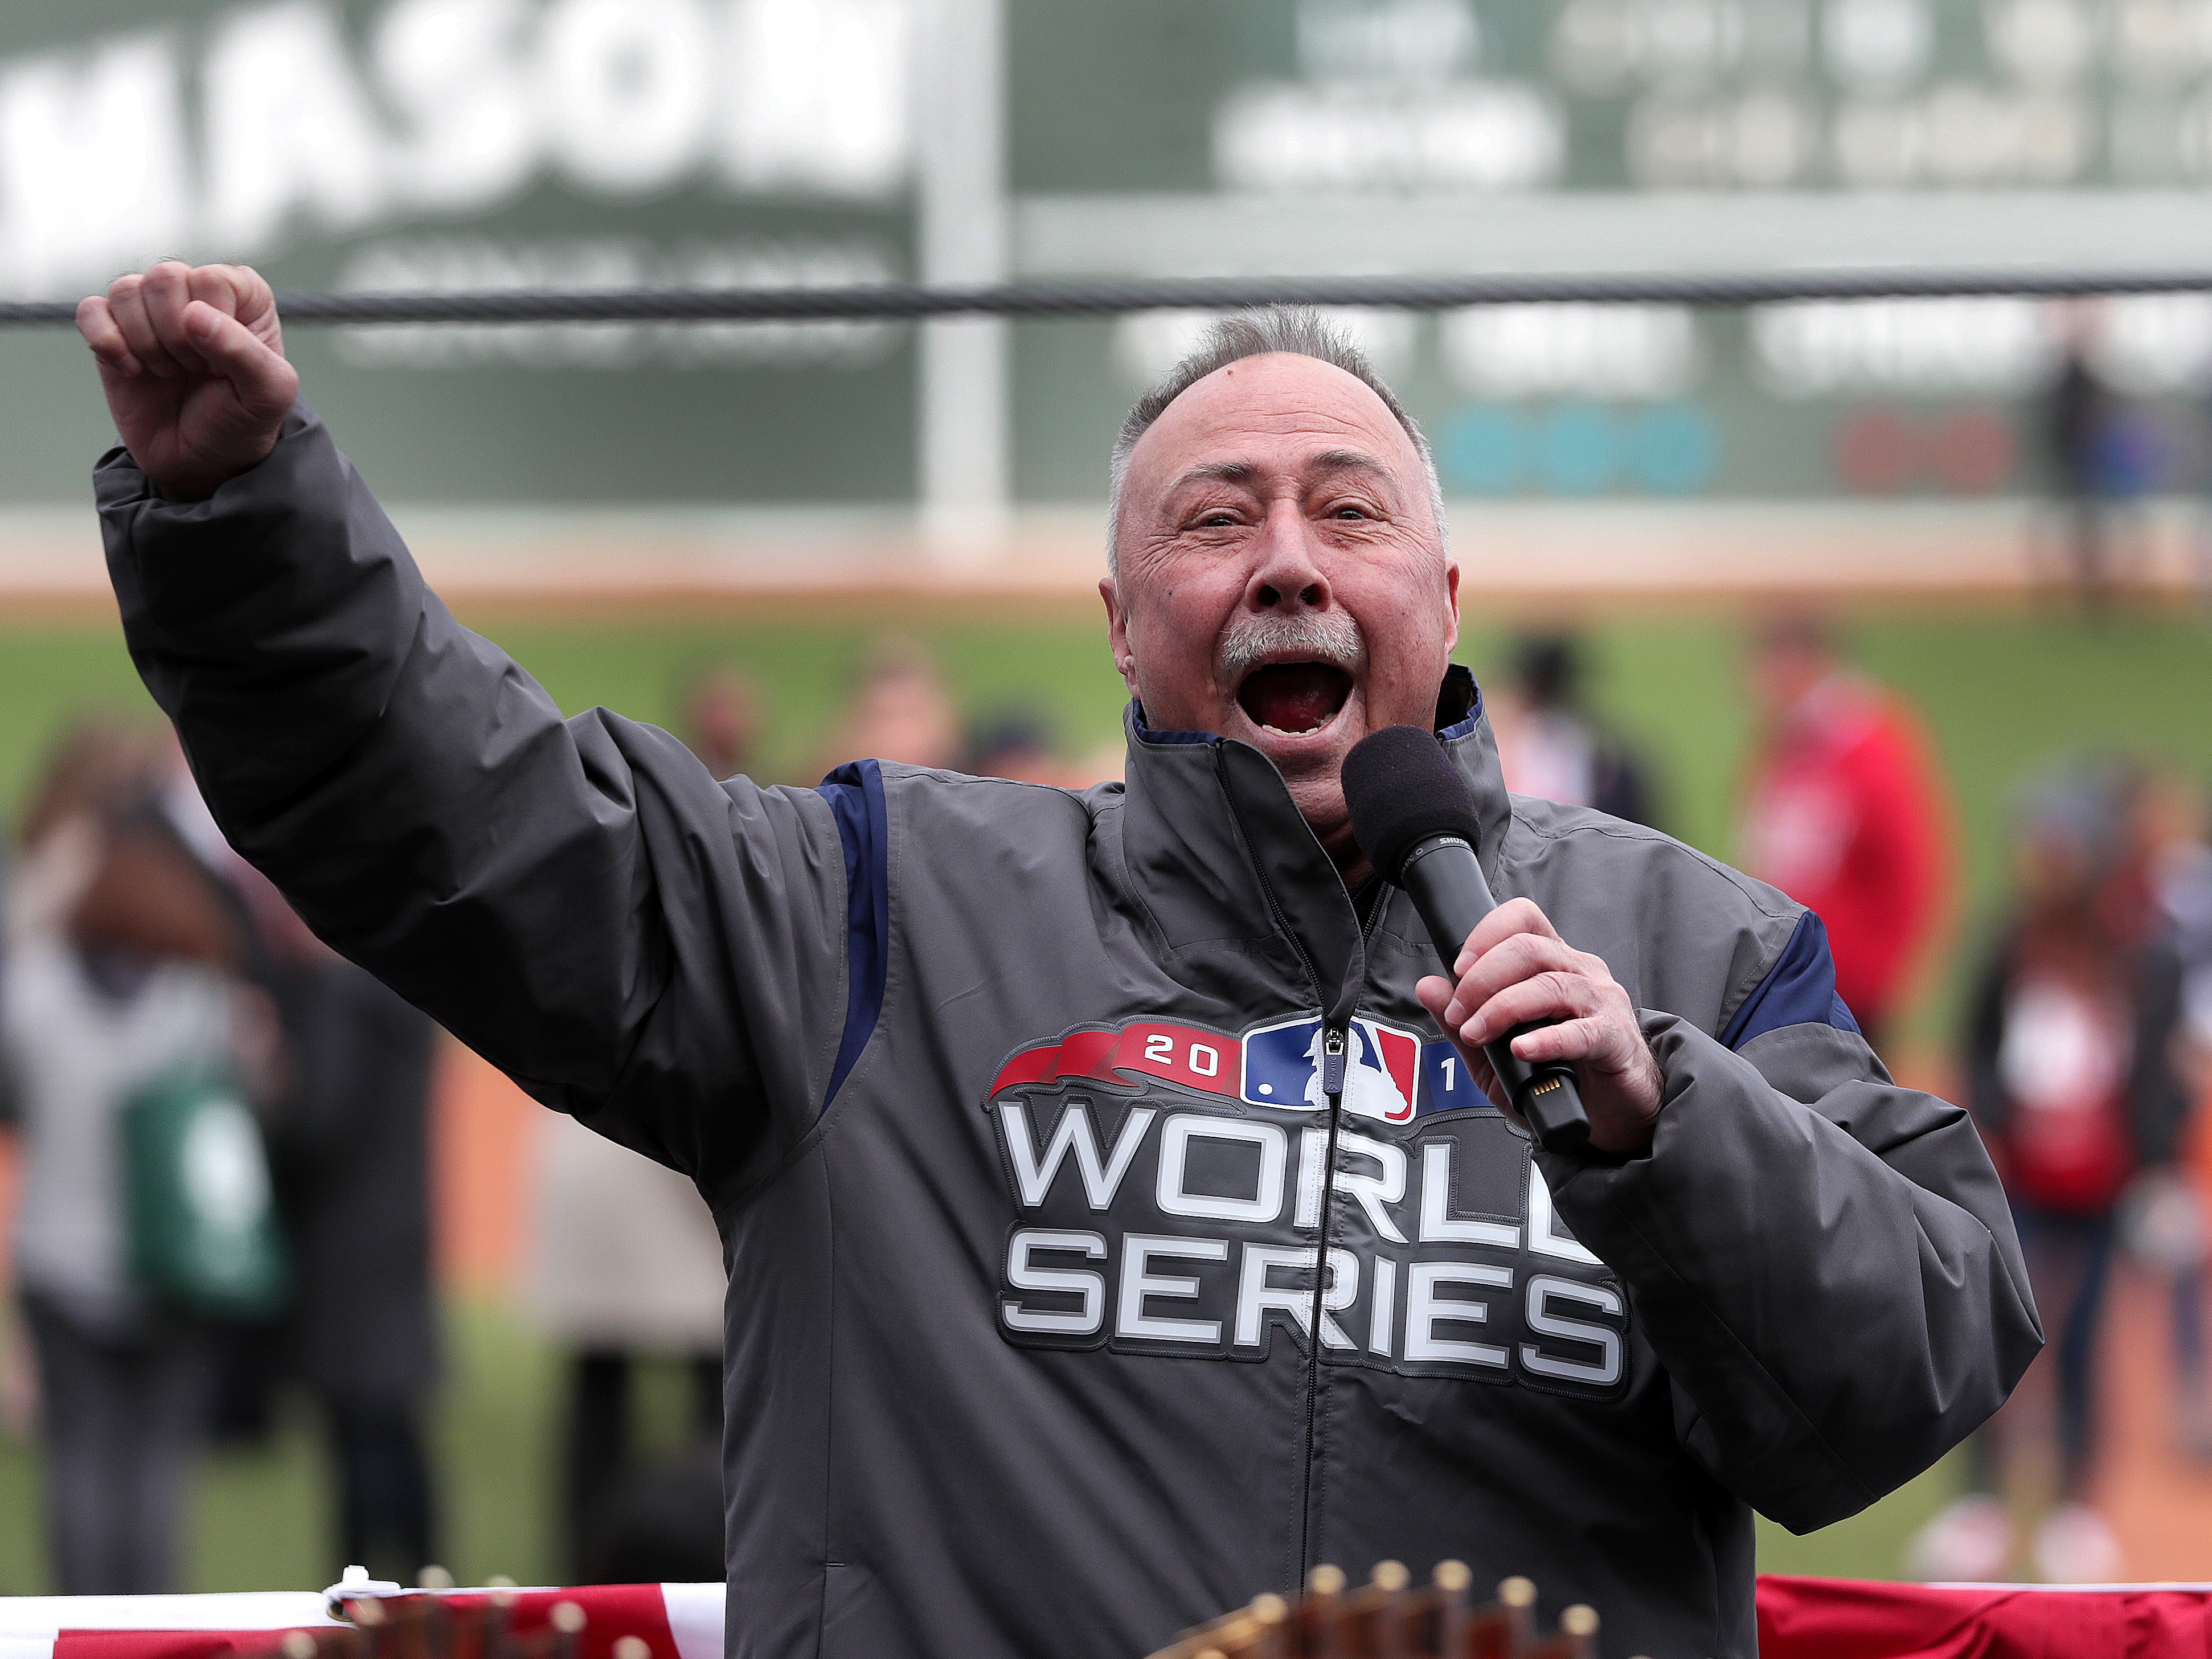 He was a joy to be around.' Six months after Jerry Remy's passing, the Red  Sox honored his life Wednesday - The Boston Globe